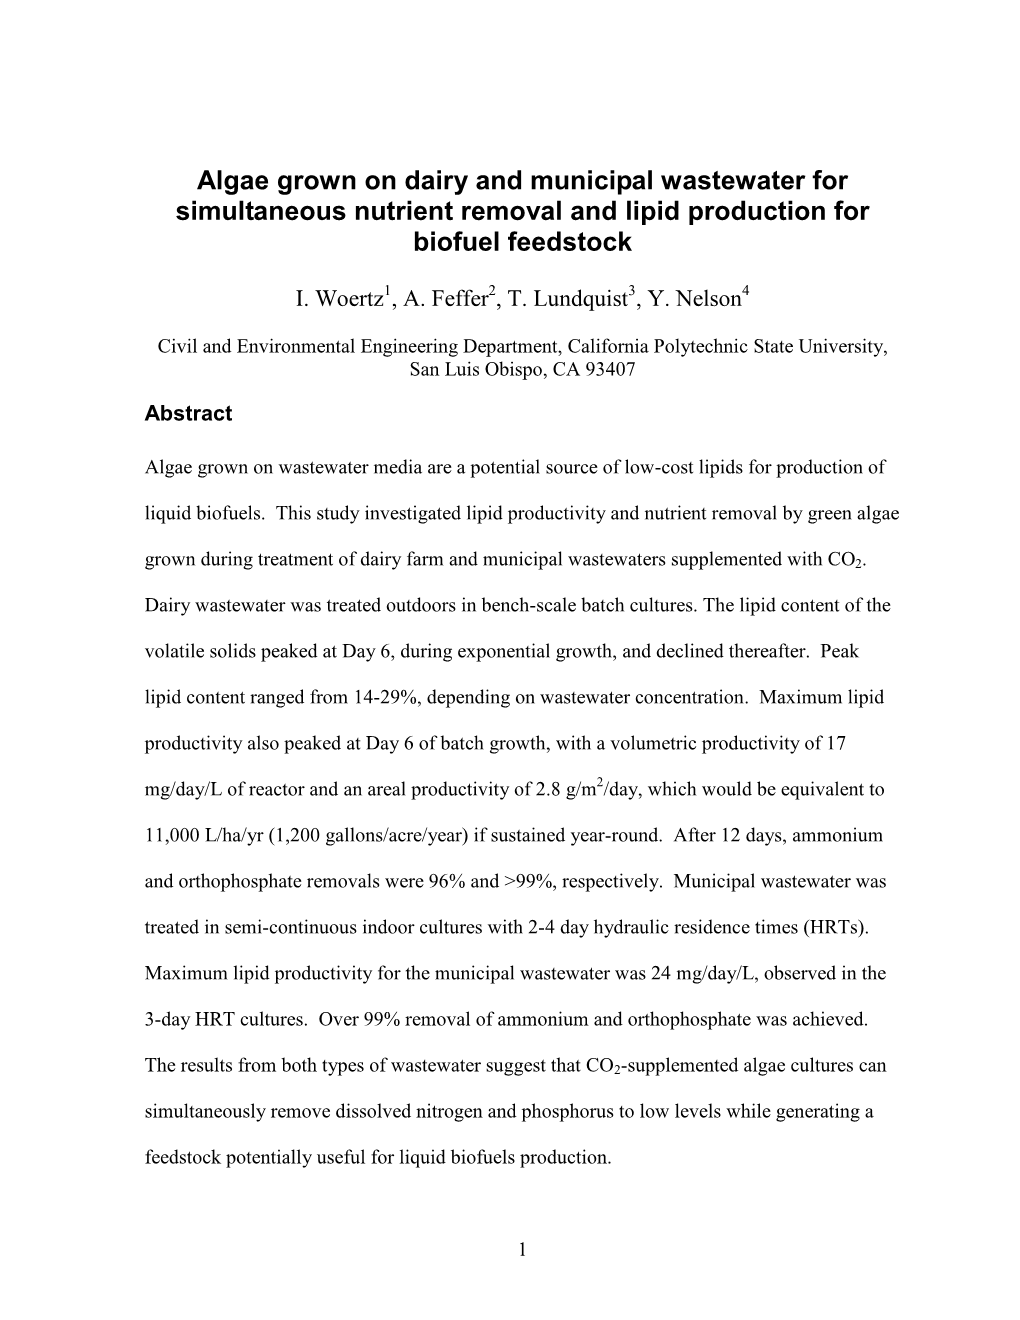 Algae Grown on Dairy and Municipal Wastewater for Simultaneous Nutrient Removal and Lipid Production for Biofuel Feedstock